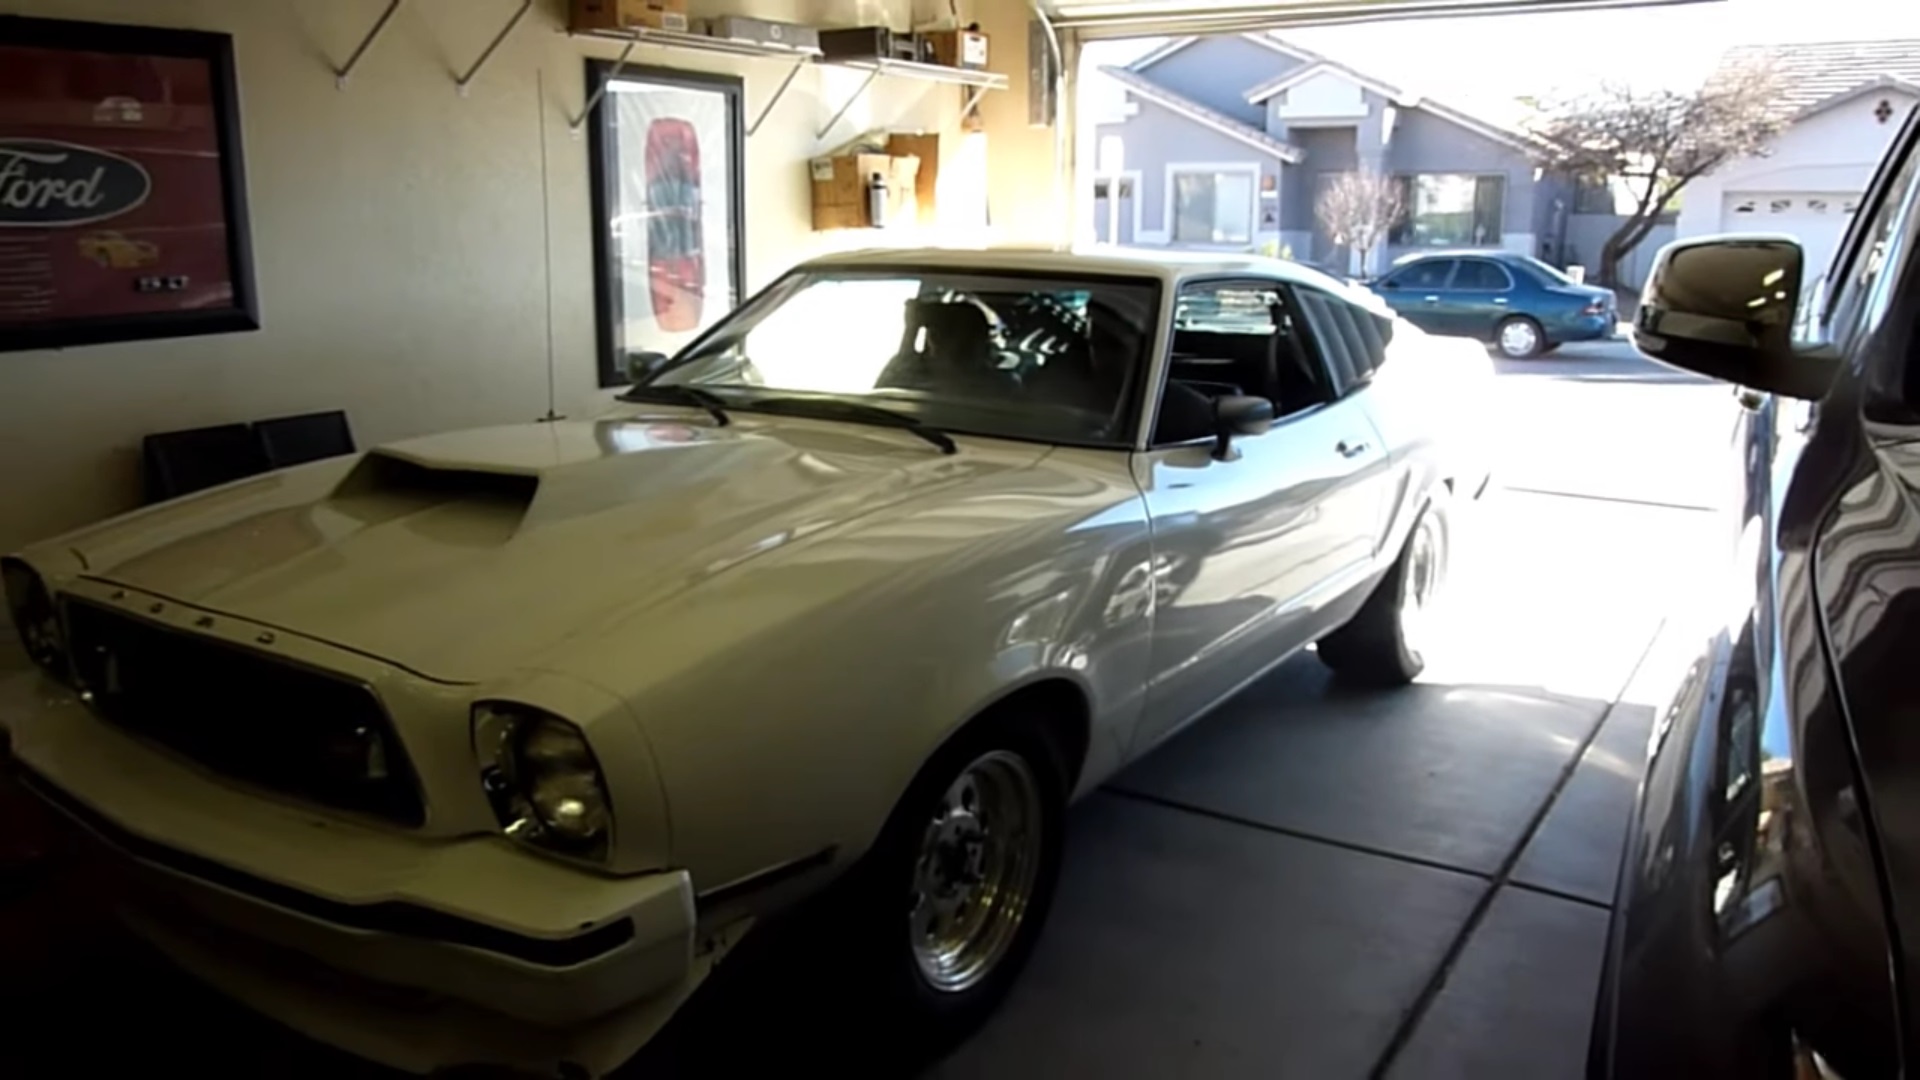 Video: 1978 Ford Mustang Cobra II Engine Test